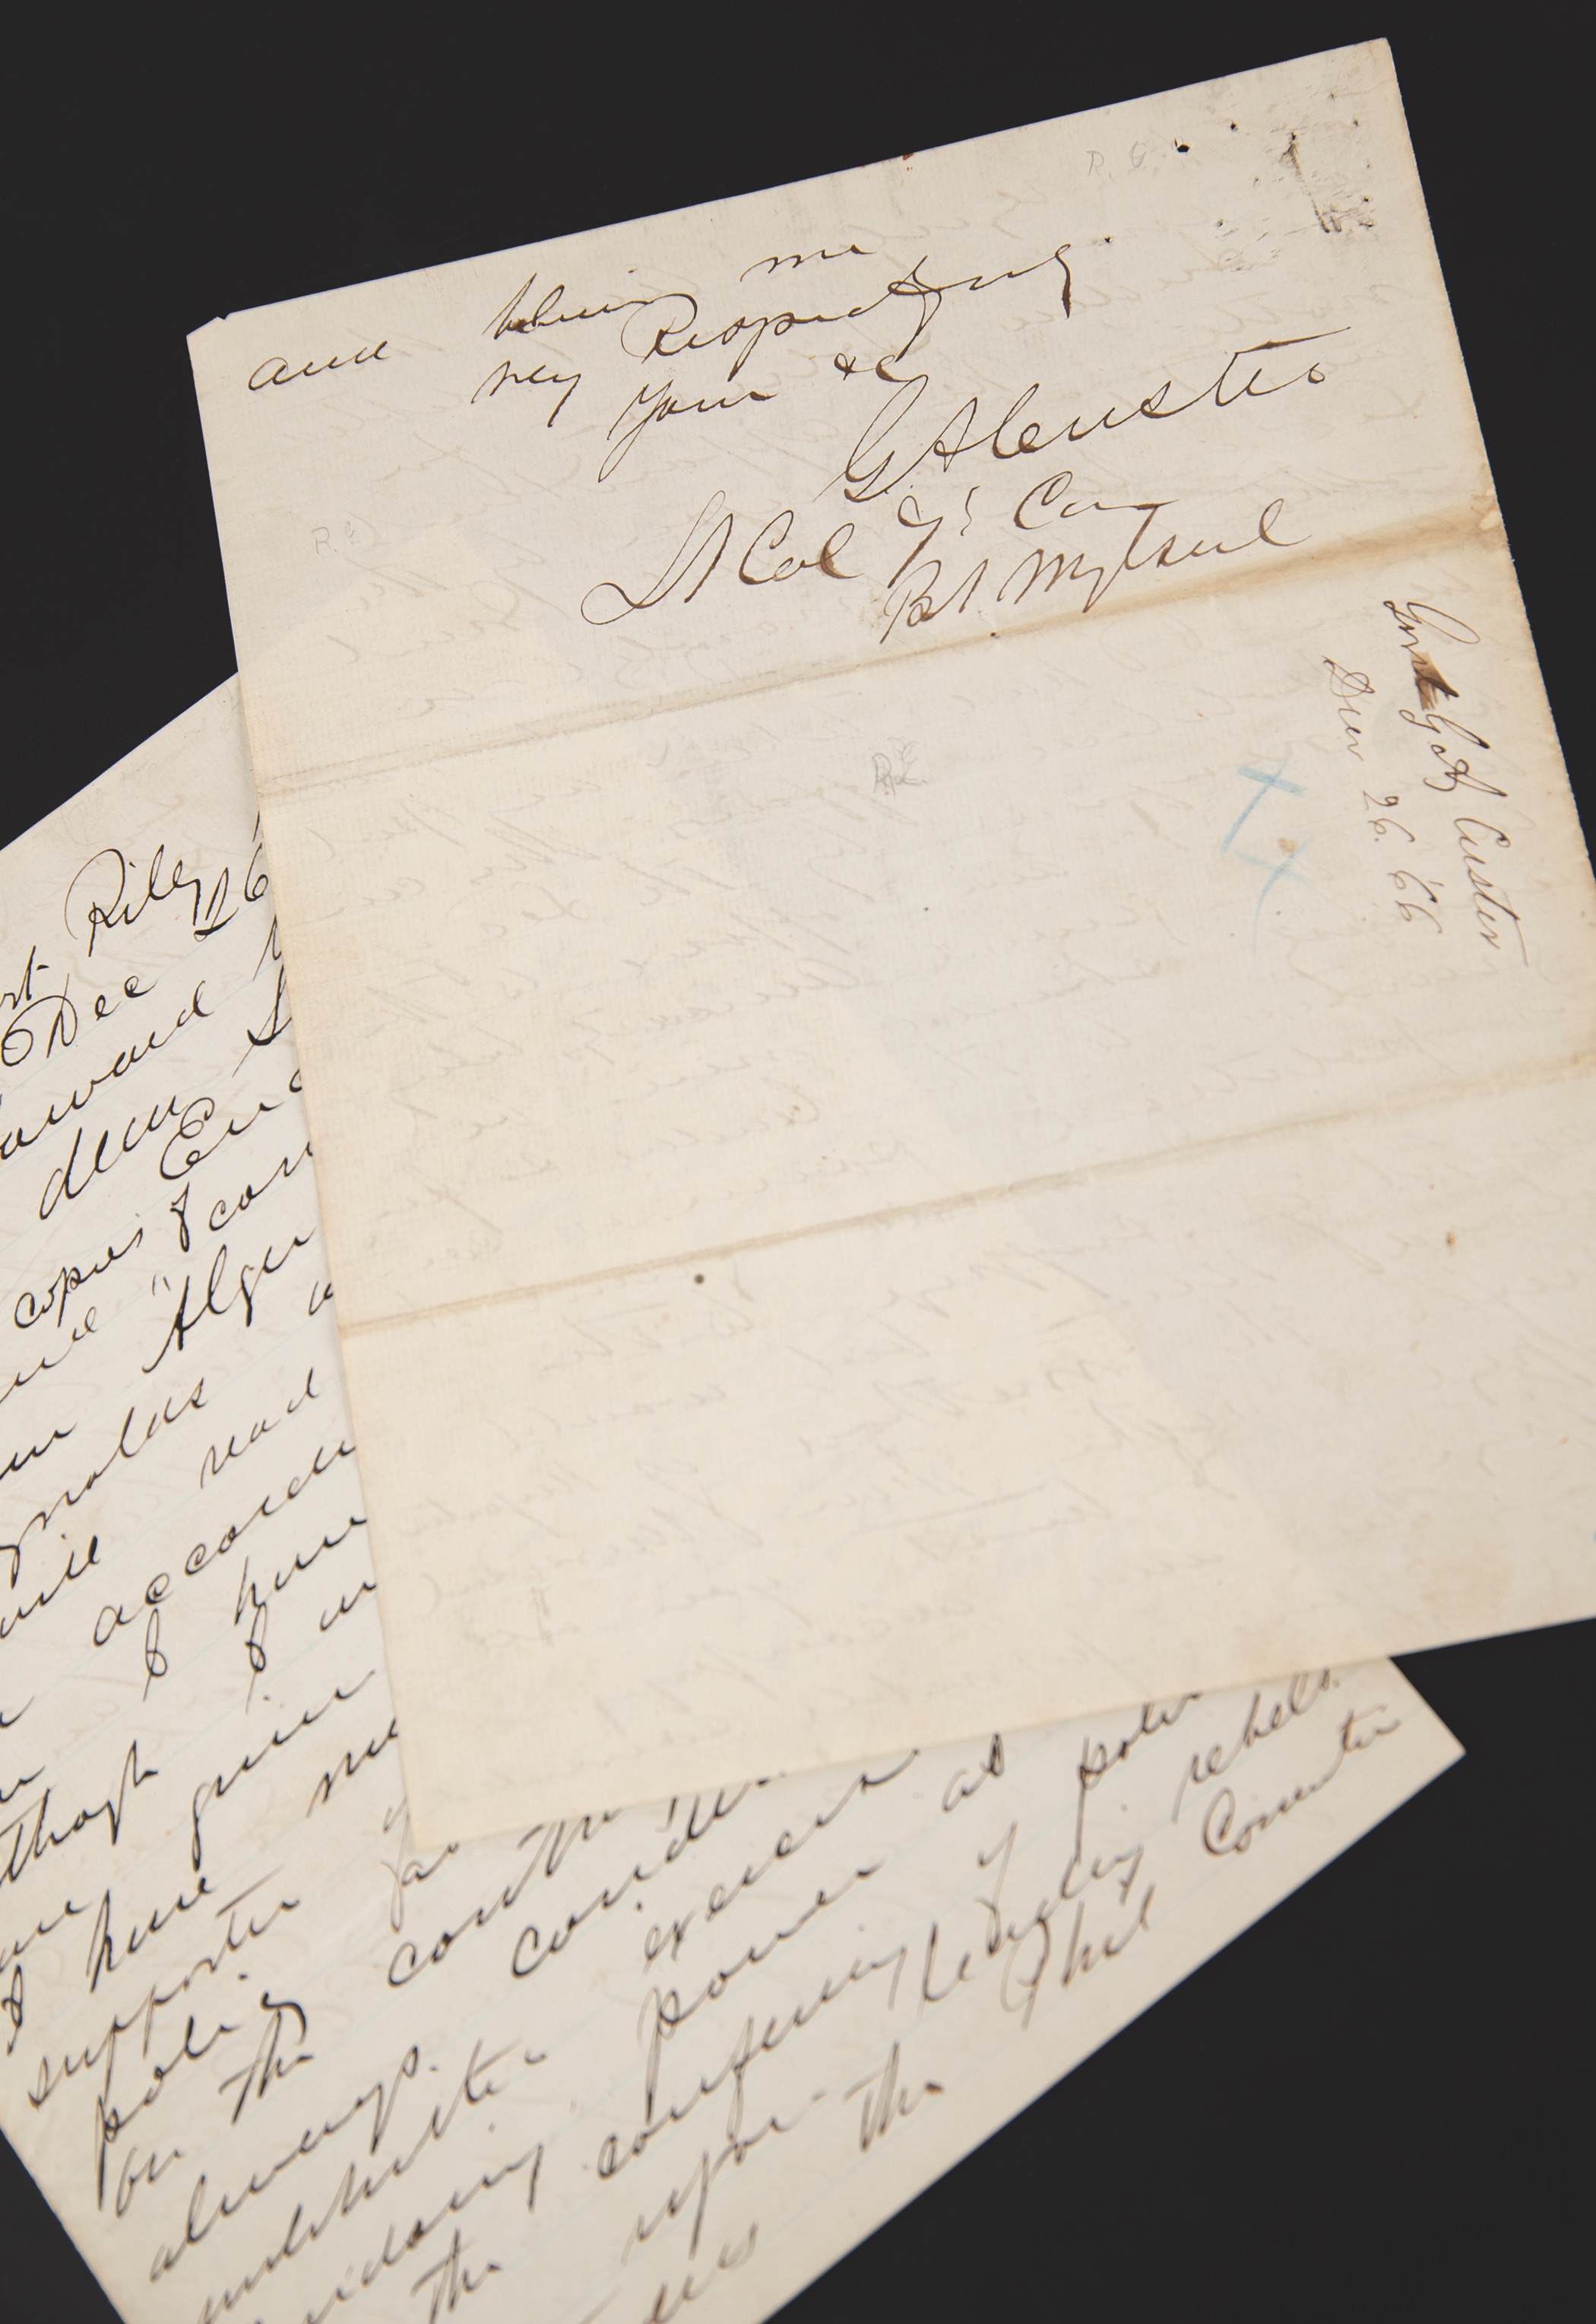 Lot #251 George A. Custer Autograph Letter Signed on Andrew Johnson and Suffrage for "colored men" - Image 1